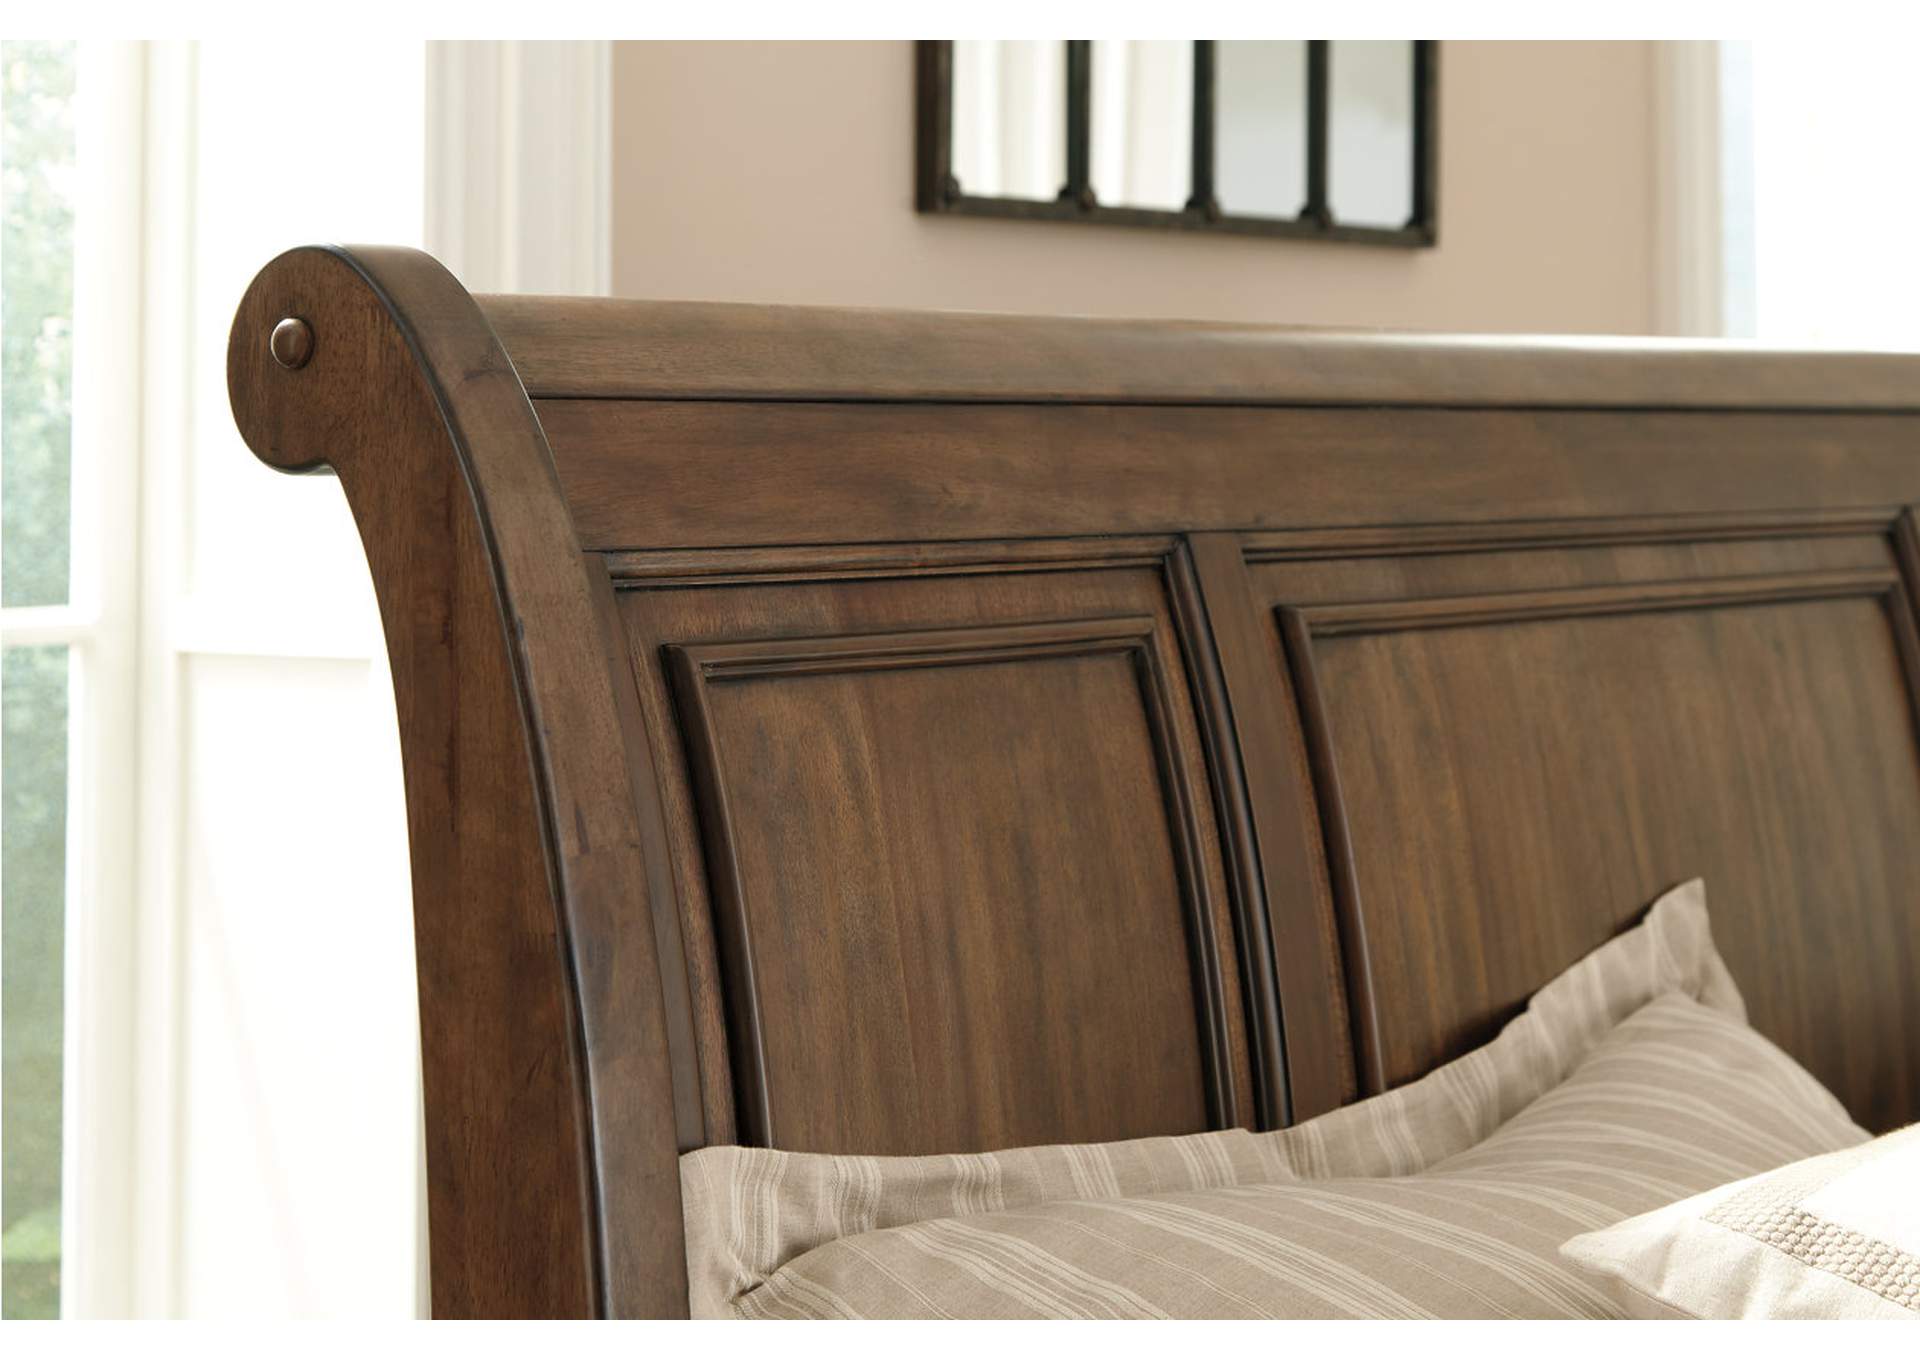 Flynnter King Sleigh Bed with 2 Storage Drawers,Signature Design By Ashley